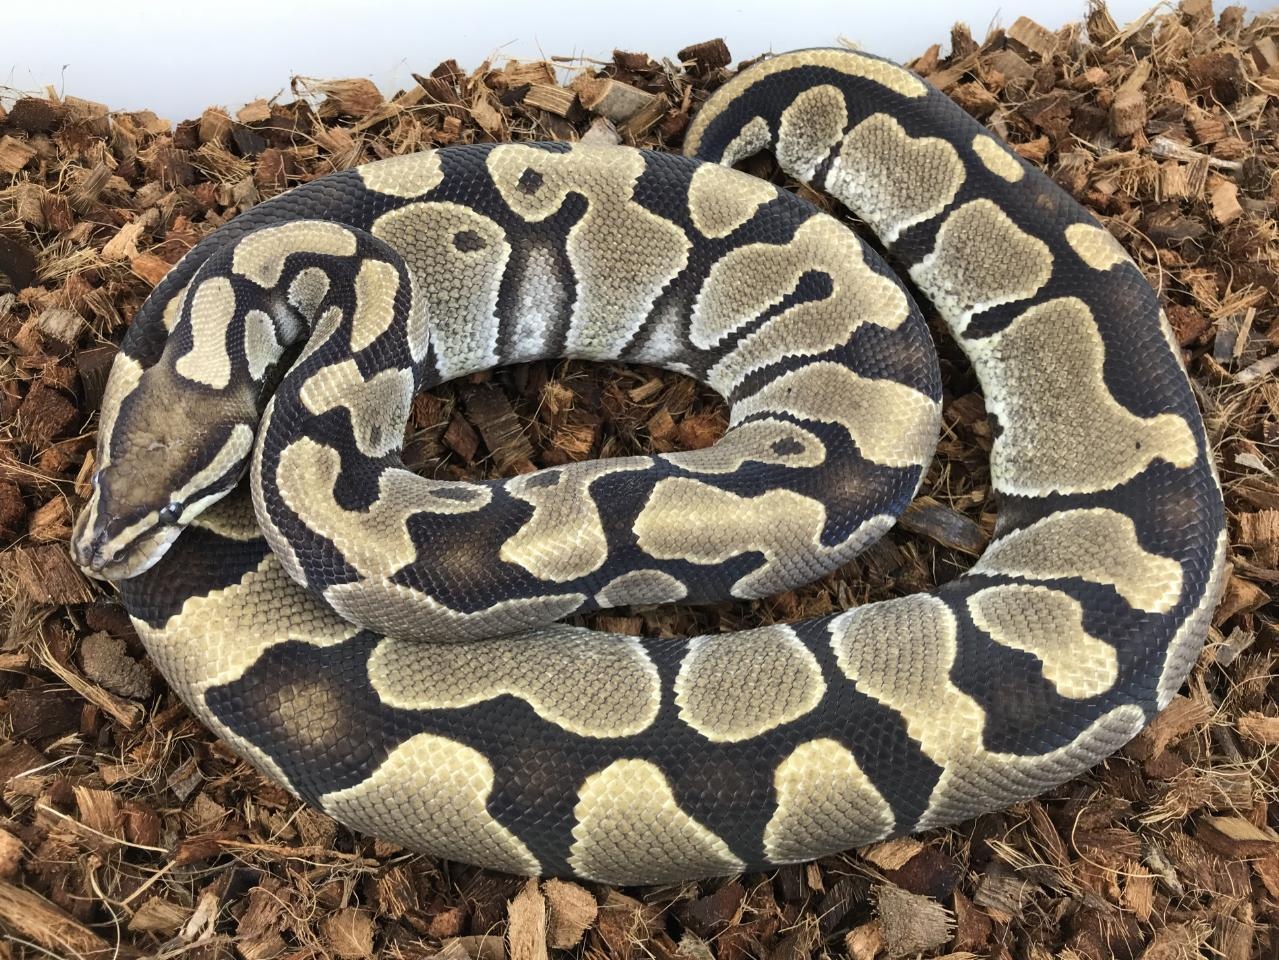 Normal Ball Python by Royal Constrictor Designs